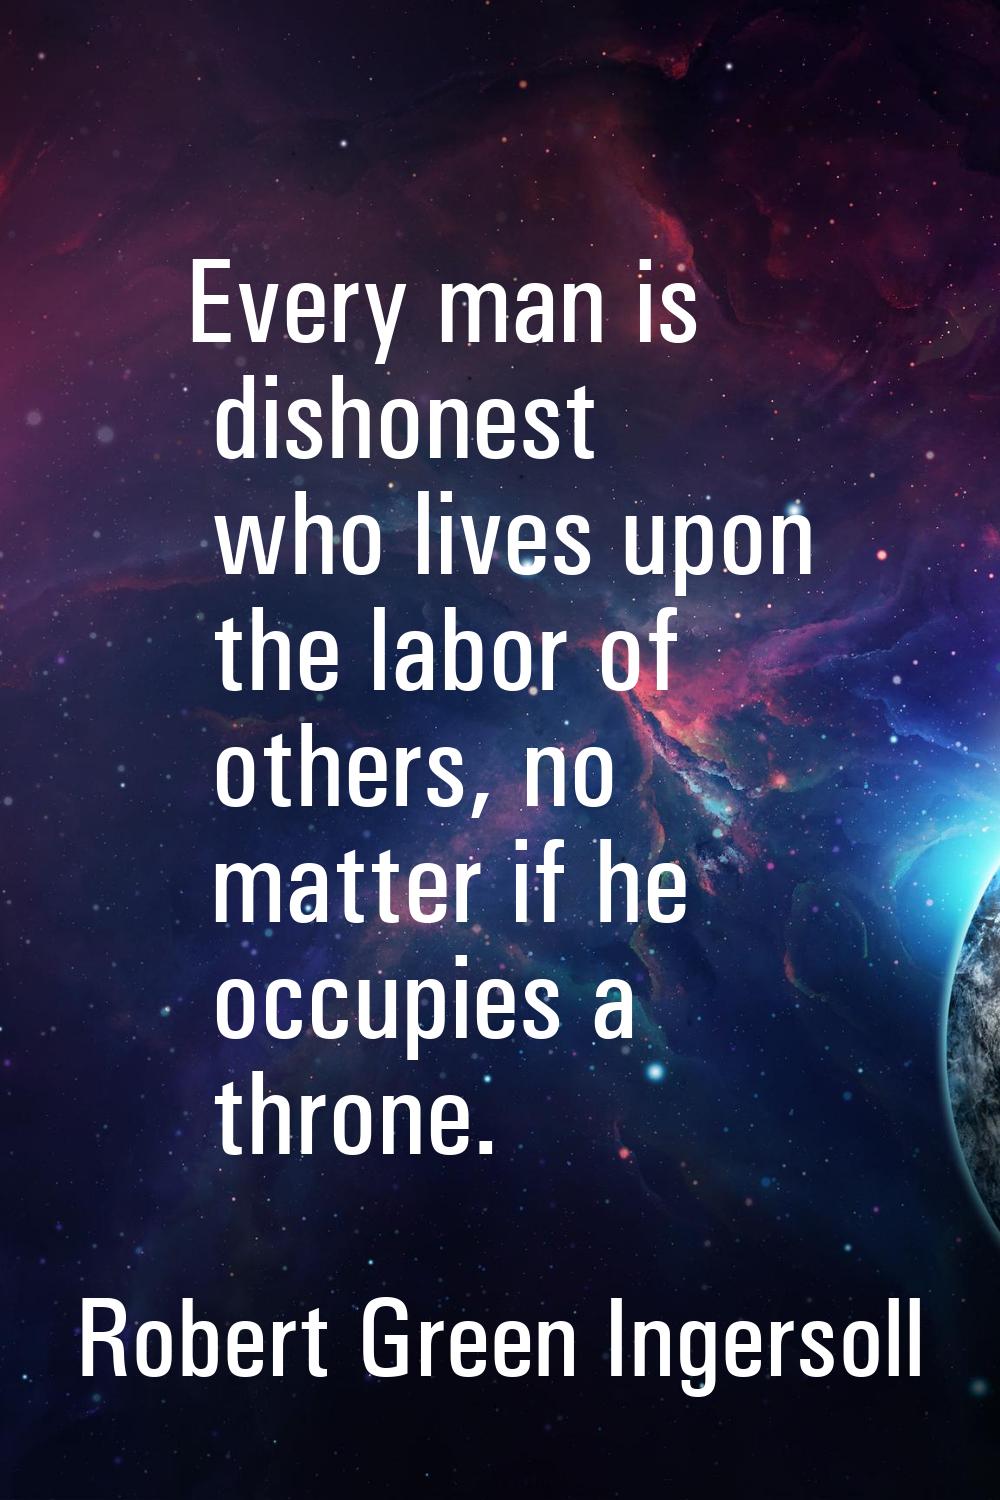 Every man is dishonest who lives upon the labor of others, no matter if he occupies a throne.